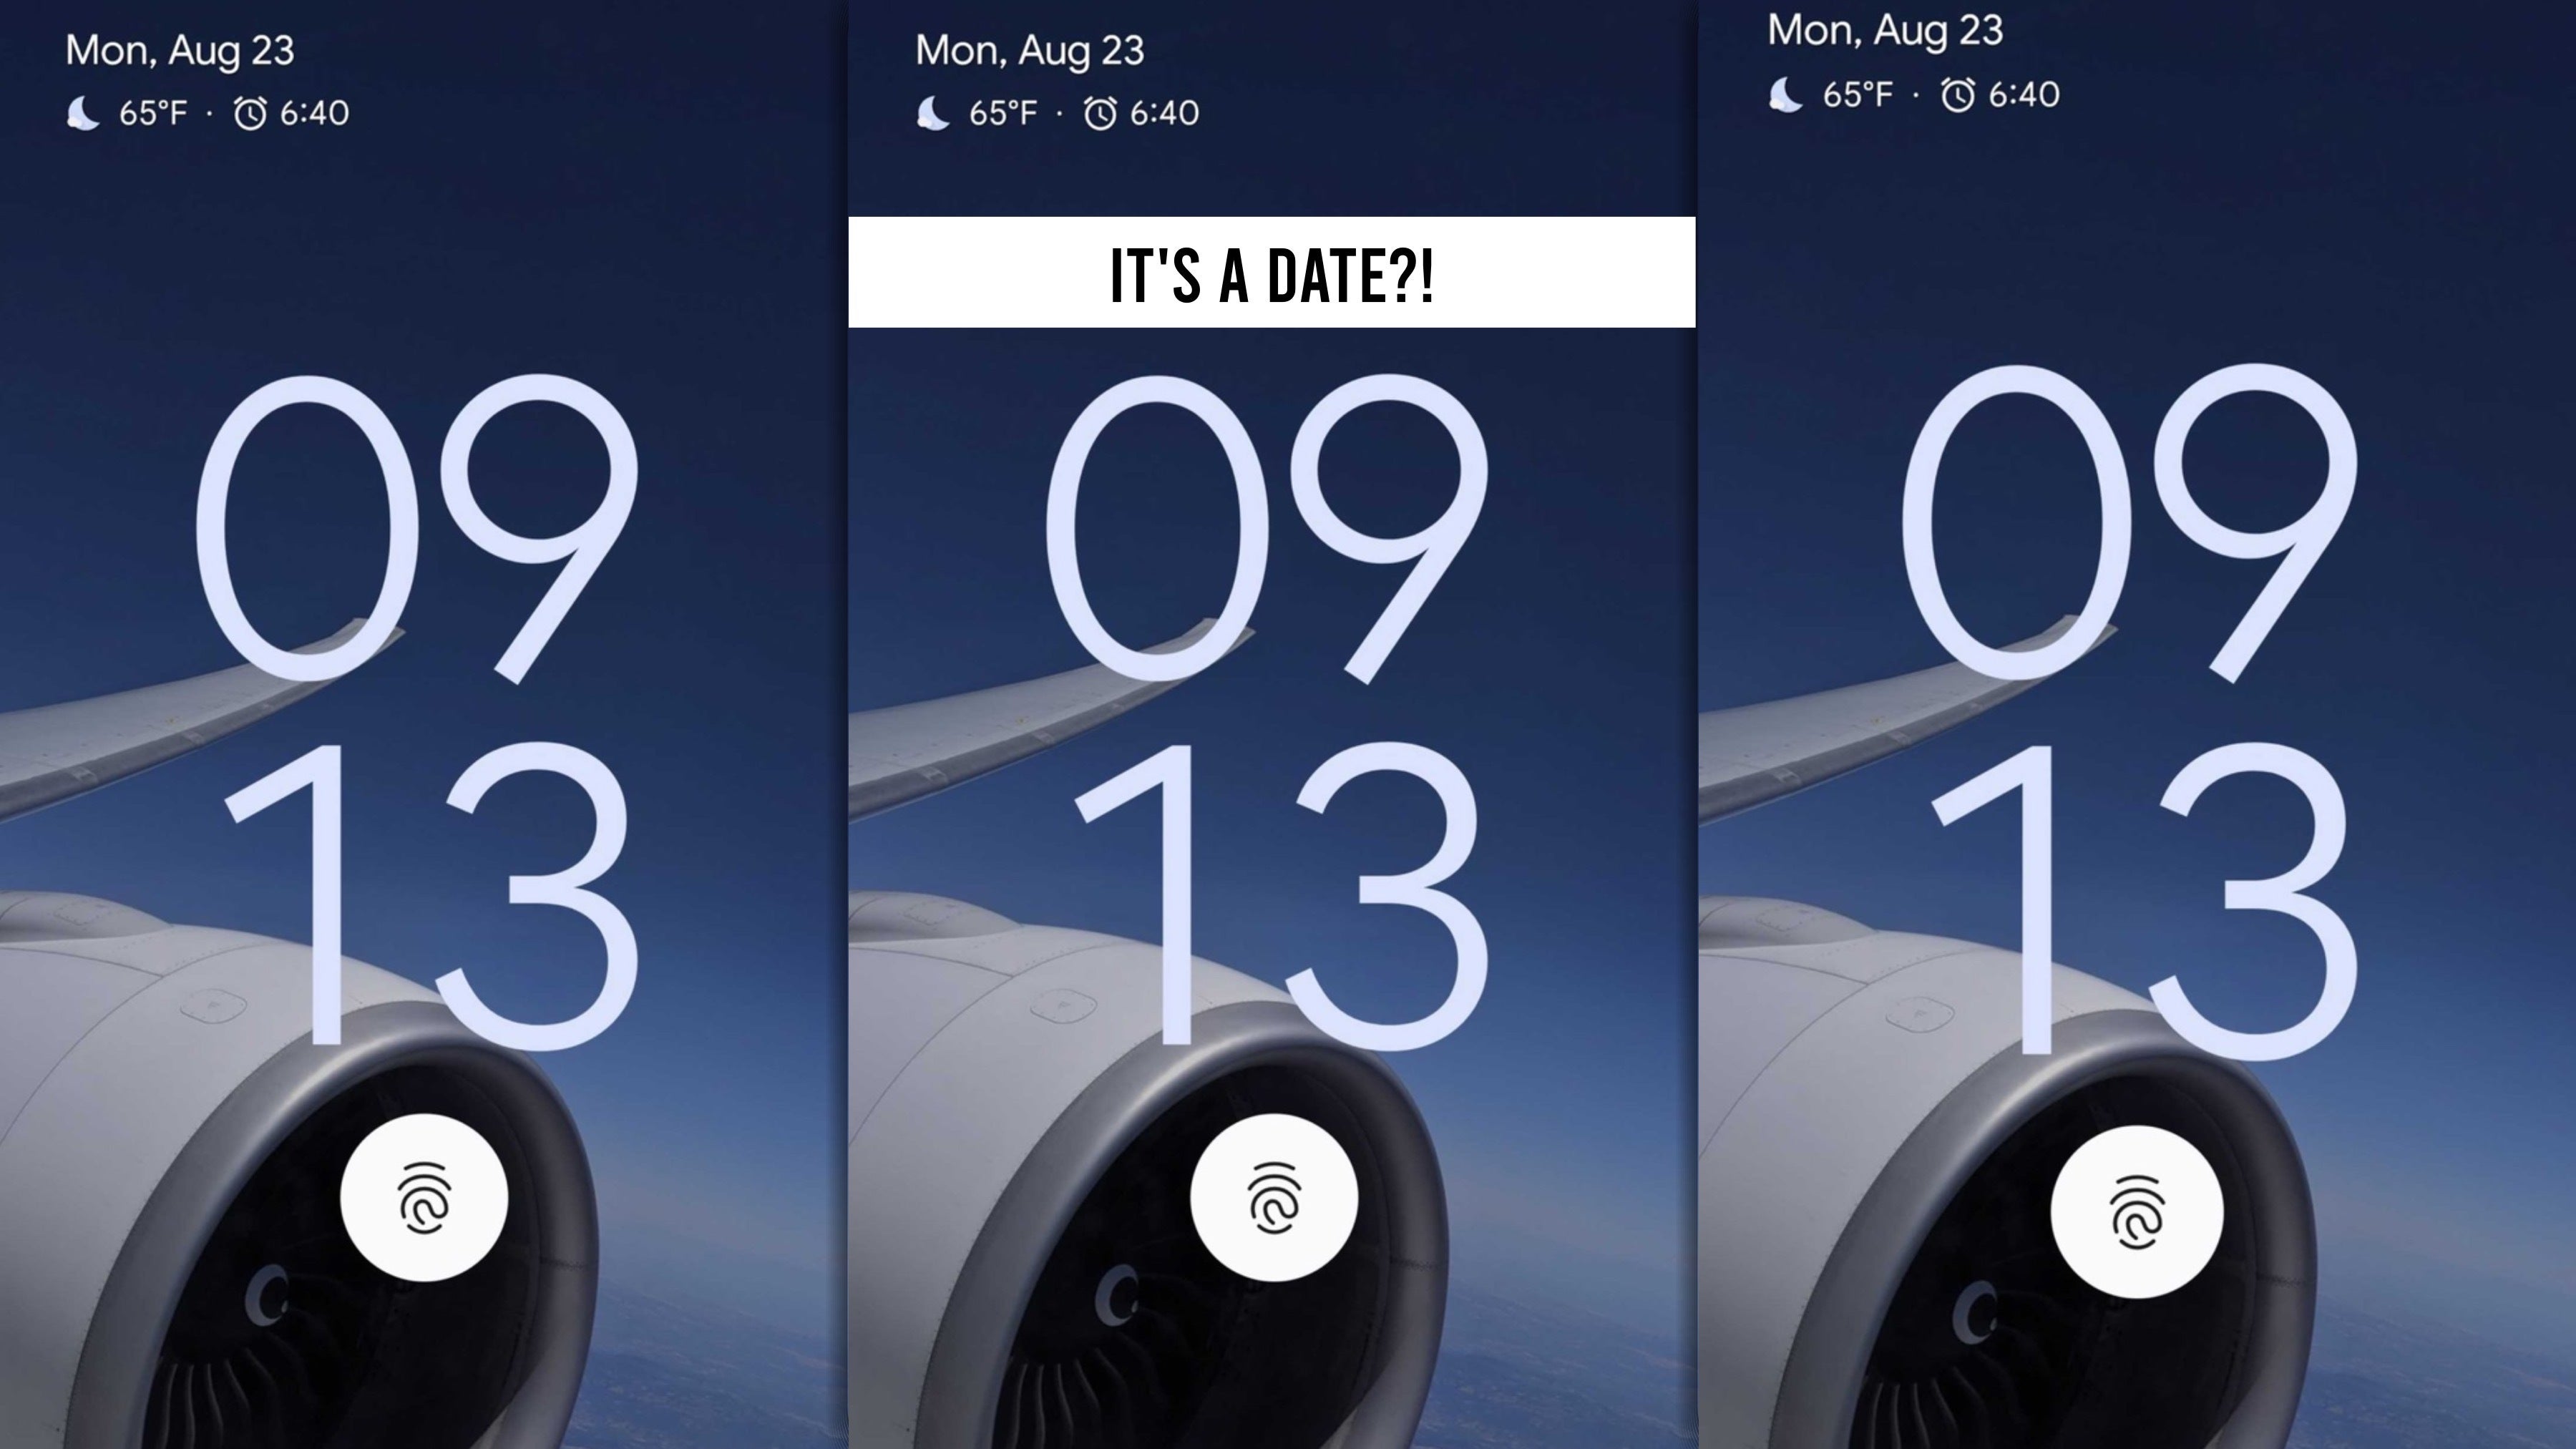 This is a screenshot shared by Hiroshi Lockheimer - Google SVP. It reveals a Pixel device with an in-screen fingerprint reader, likely the Pixel 6. However - could the "time" on the screenshot actually be a date?! Is Google Pixel 6 coming out September 13 - a day before the iPhone 13?! That's a stretch, but stretching is good for you. Jon Prosser claims the Pixel 6 is coming out in October. - Pixel 6: Google and Samsung's overdue flagship takes on iPhone 13, after failing to launch in 2020